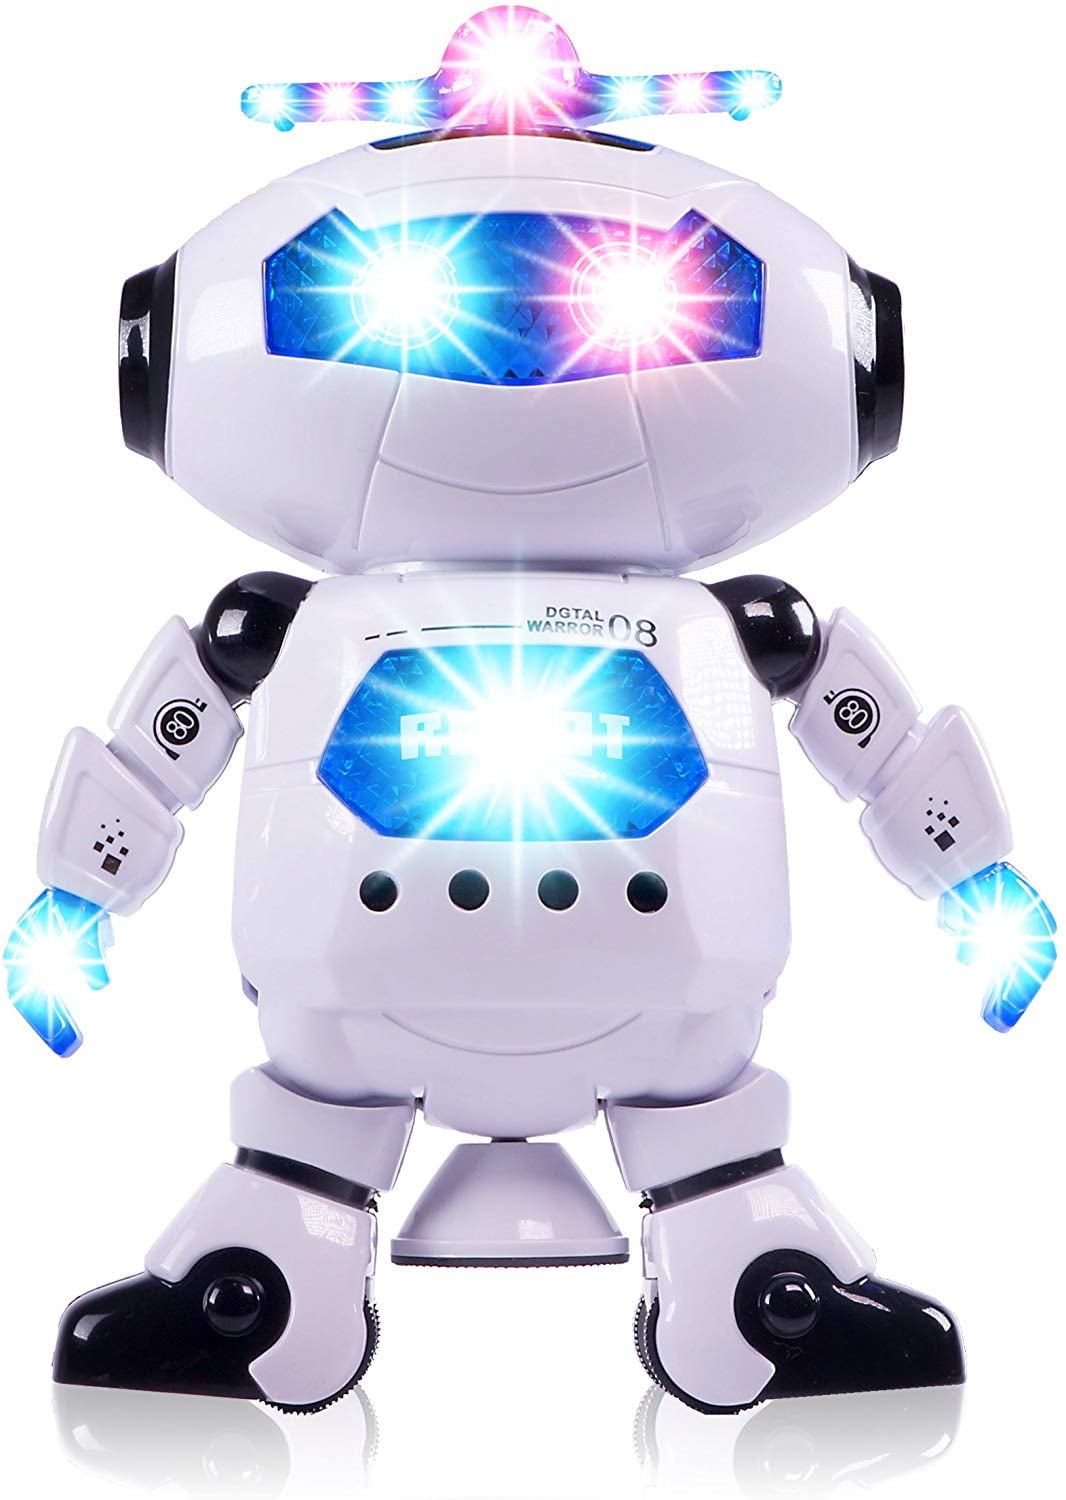 Dancing Robot Toy Rotating Walking with LightMusic Toy for Kids Gift 